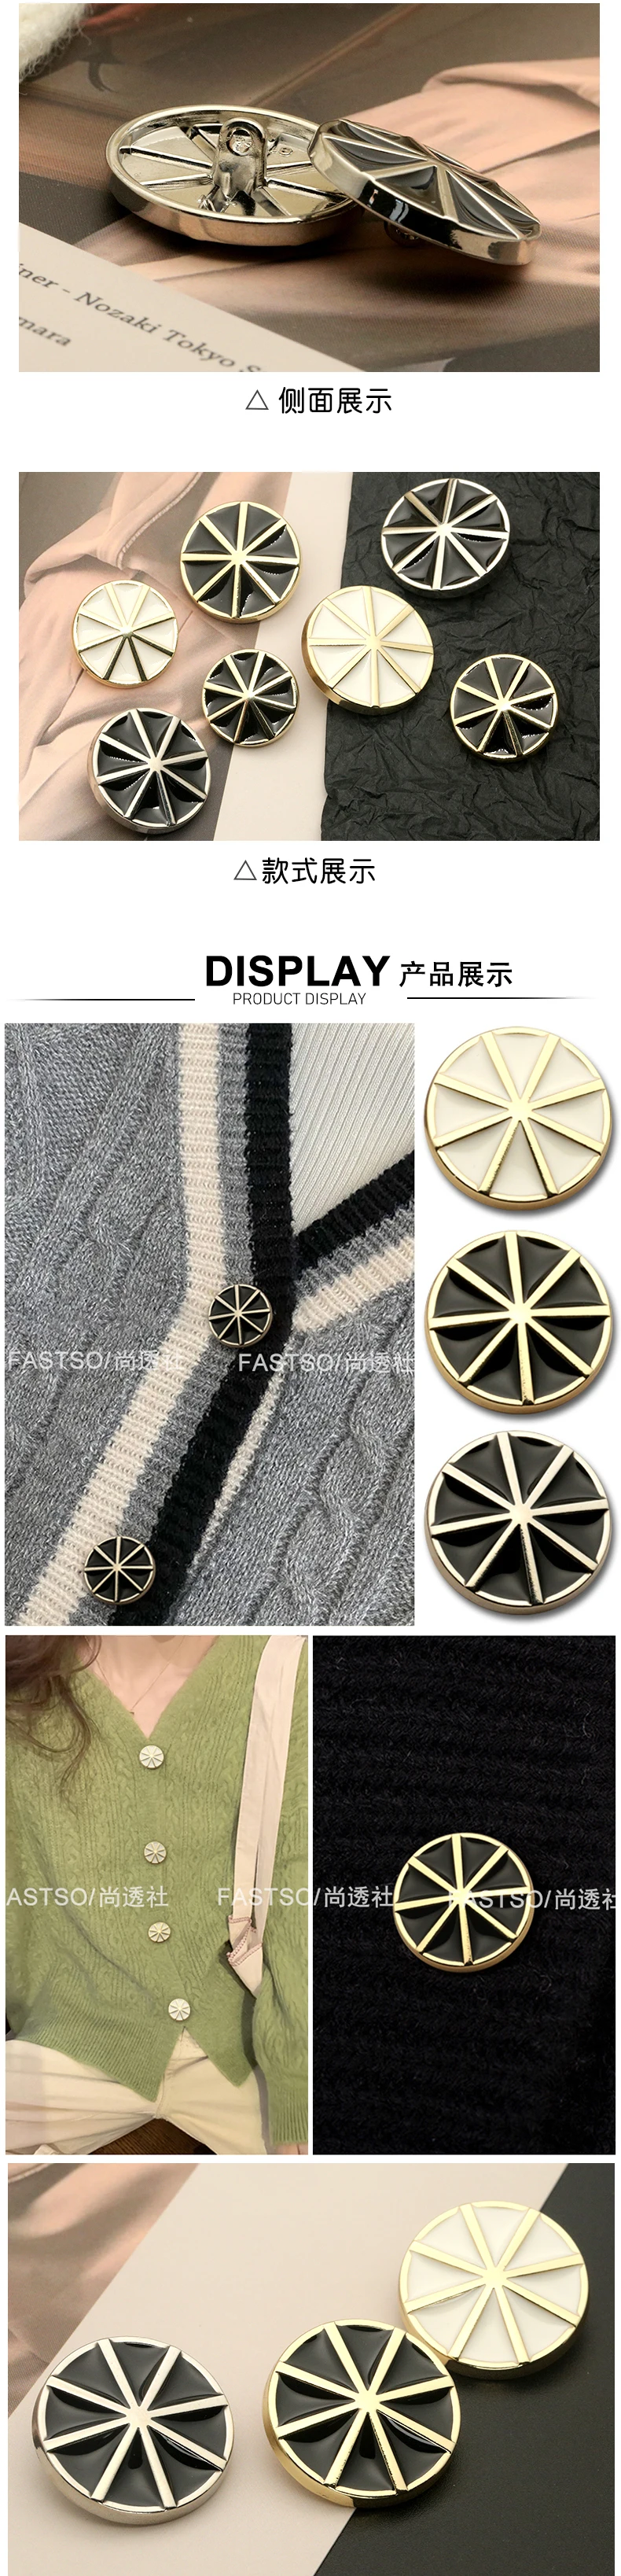 Fiber 6pcs 15～25mm White Black Golden Metal Sewing Buttons for Men Women Sweaters Suits Coats Jackets Clothing Accessories Needlework sewing and quilting supplies